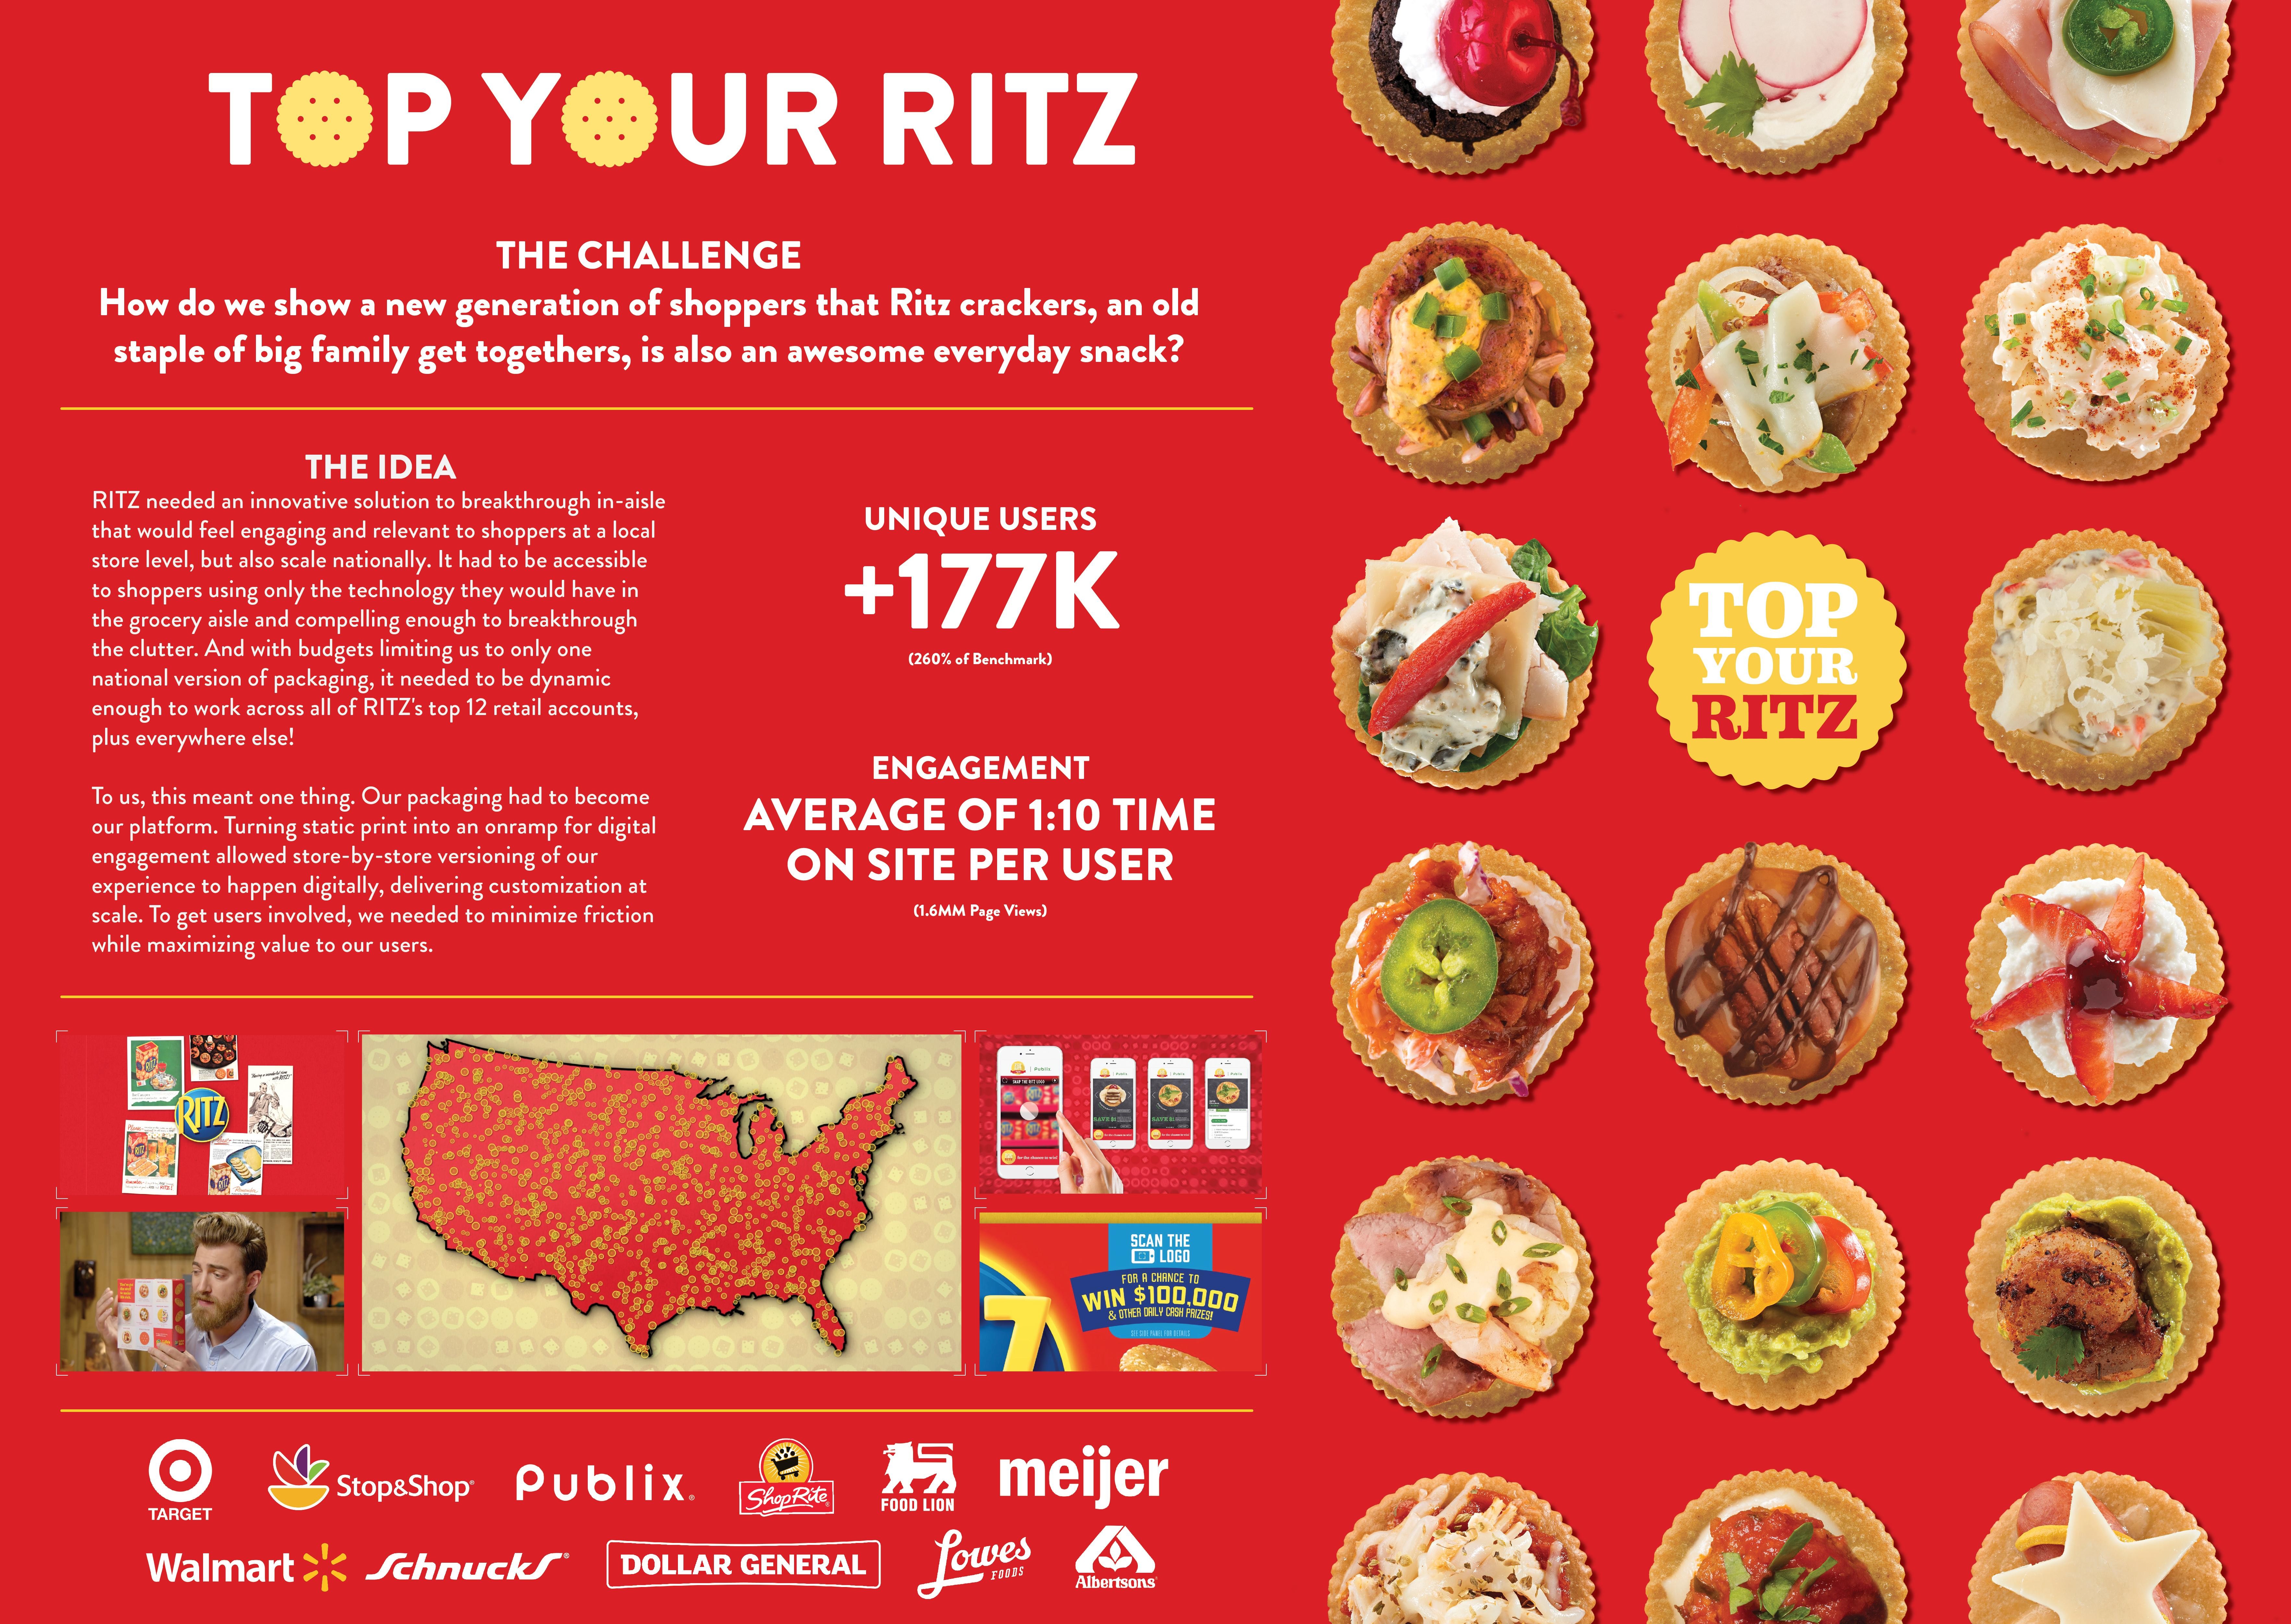 "Top Your Ritz" Connected Pack